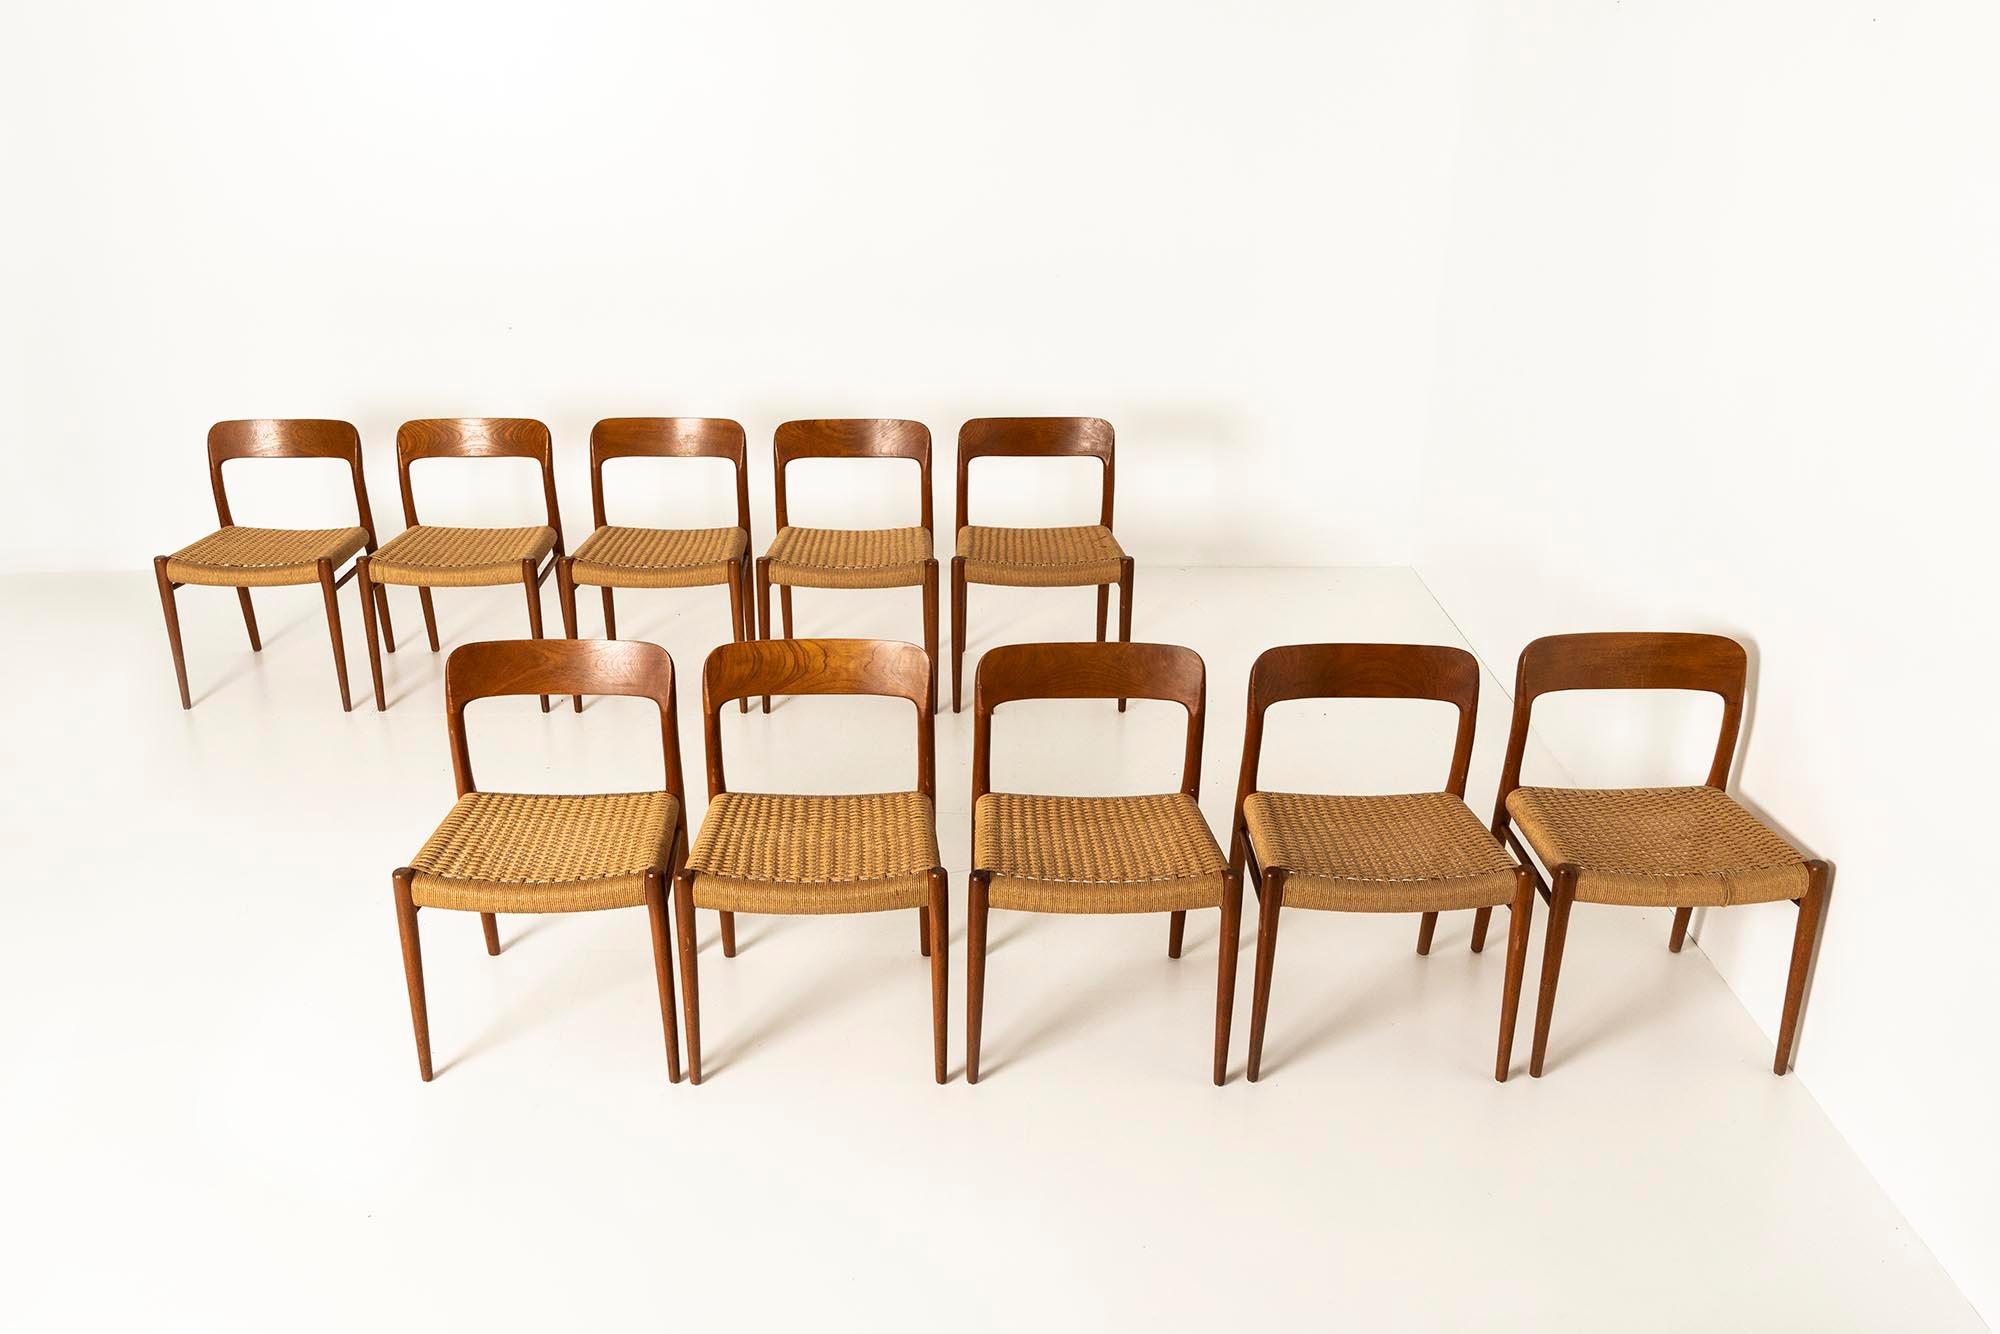 10 Niels Otto Møller 'Model 75' Chairs in Teak and Danish Paper Cord, 1960s In Good Condition For Sale In Hellouw, NL